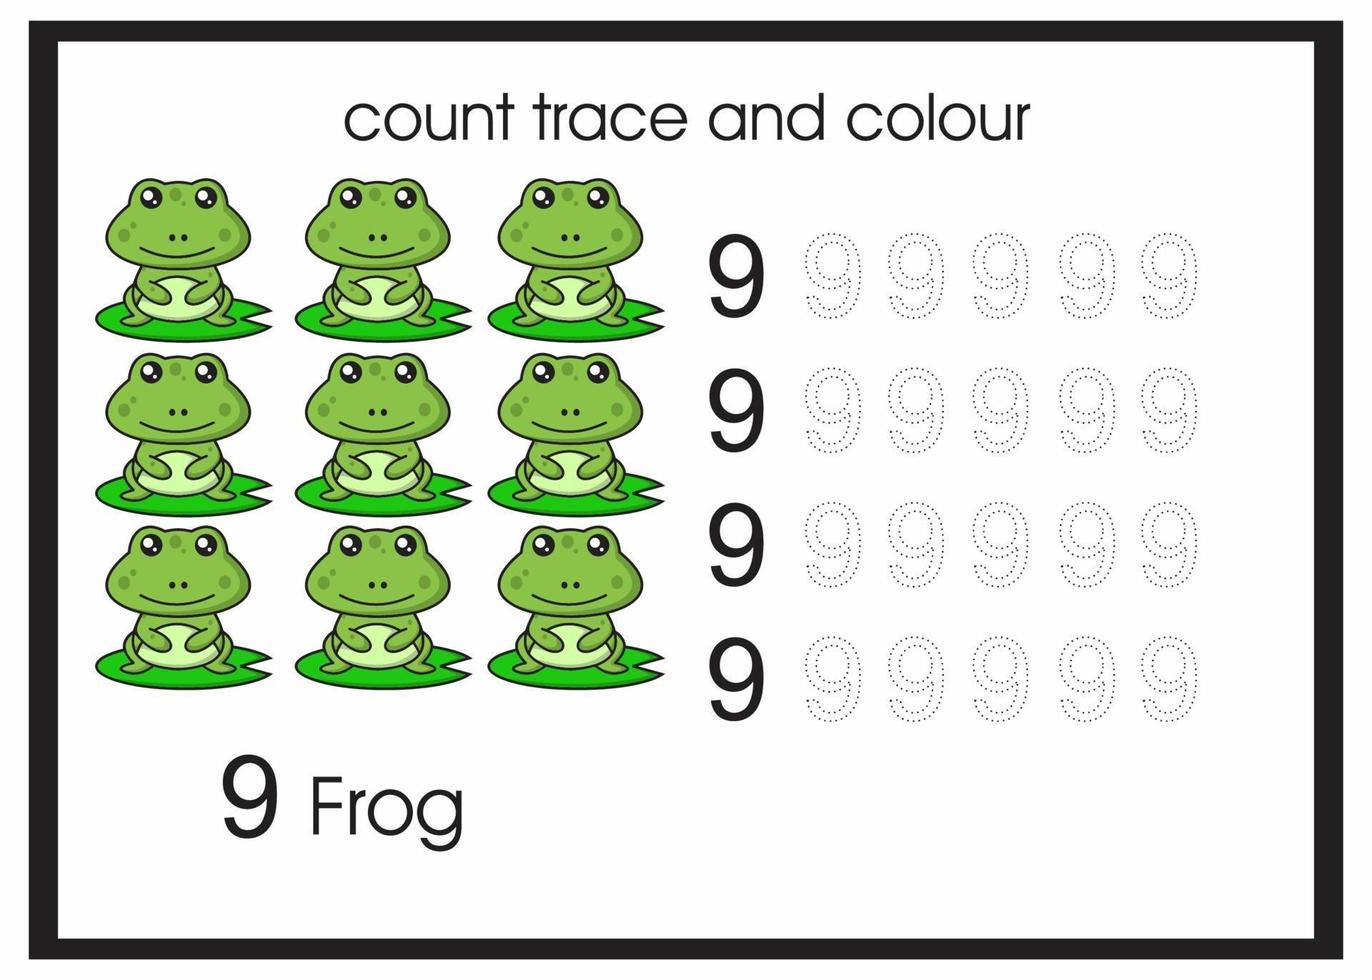 count trace and colour frog number 9 vector